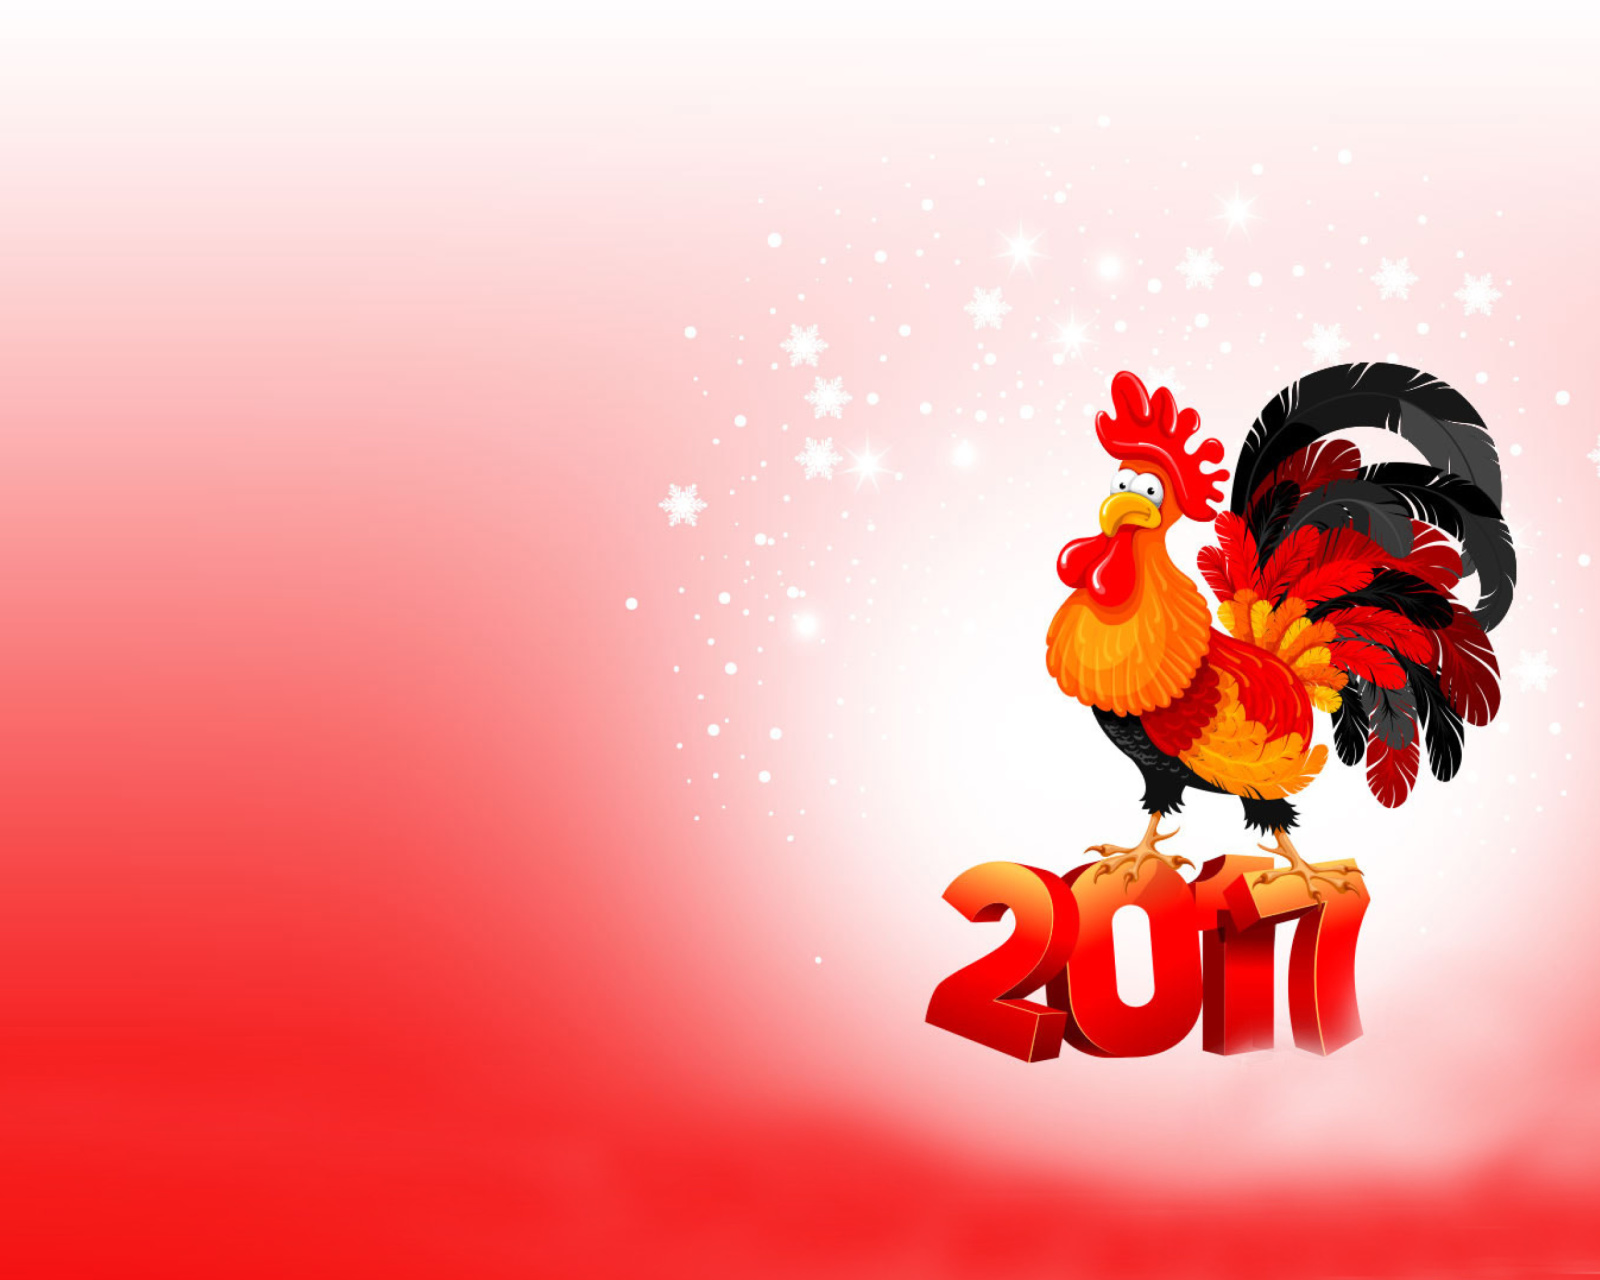 2017 New Year of Cock wallpaper 1600x1280